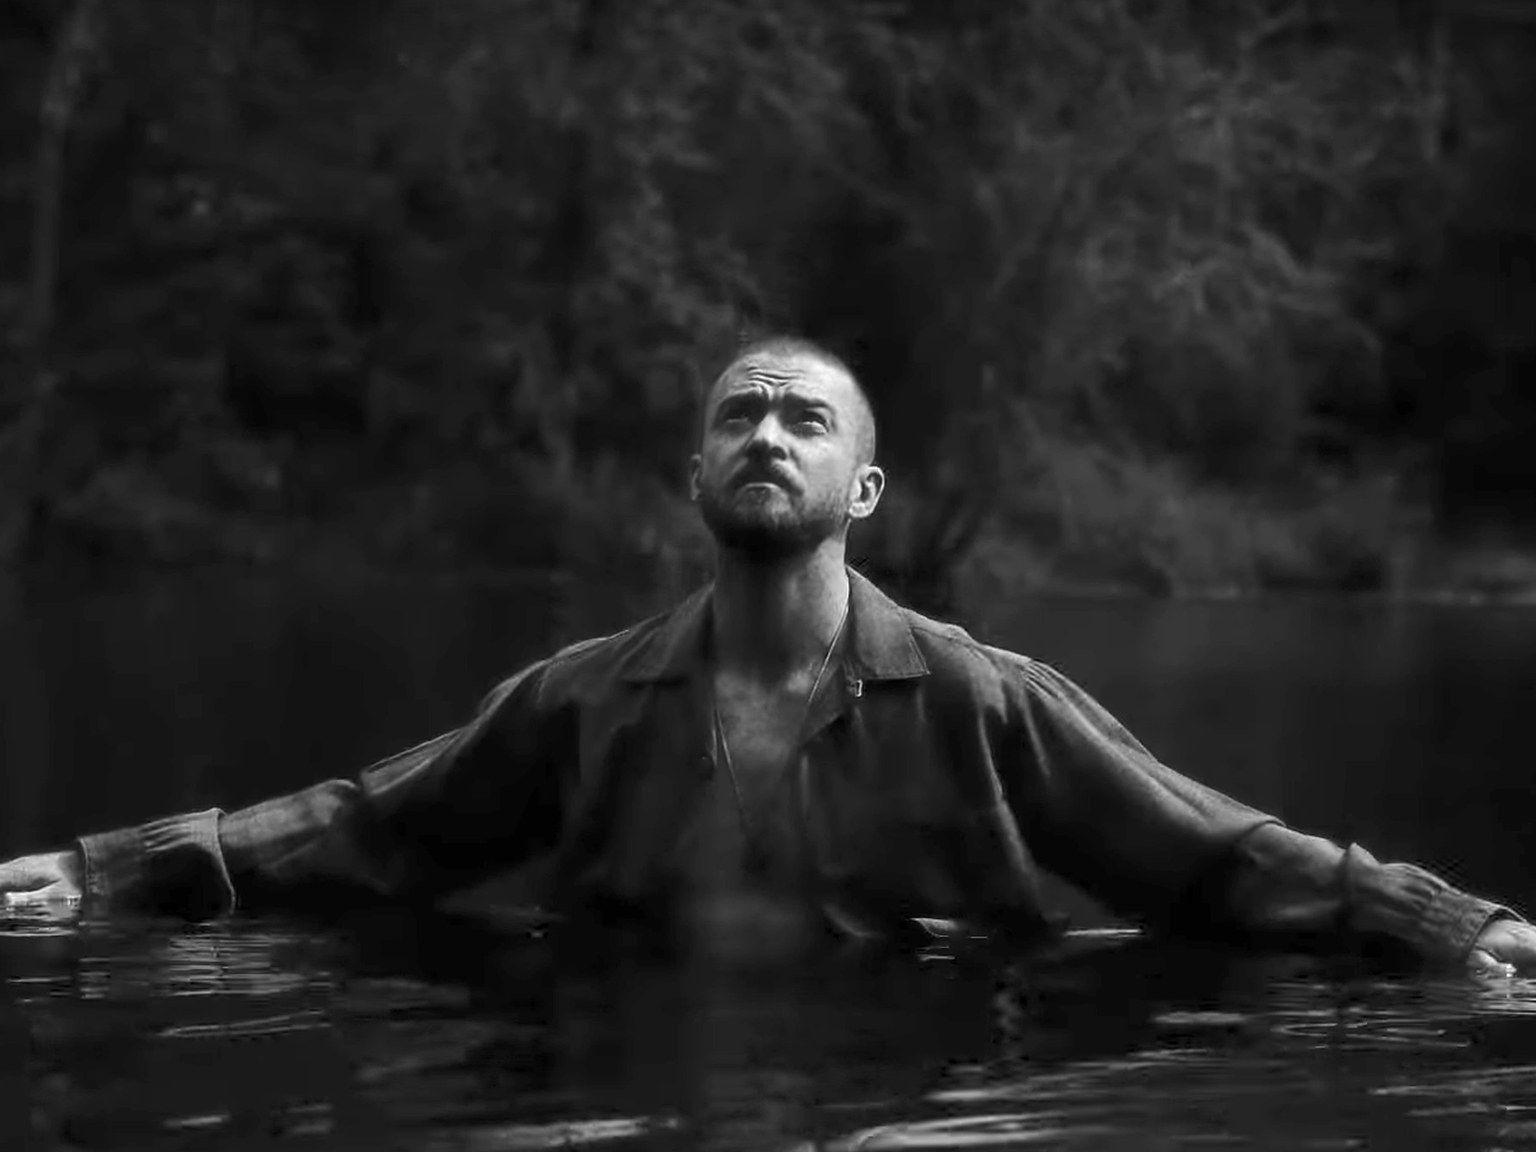 Justin Timberlake Announces New Album, Man of the Woods